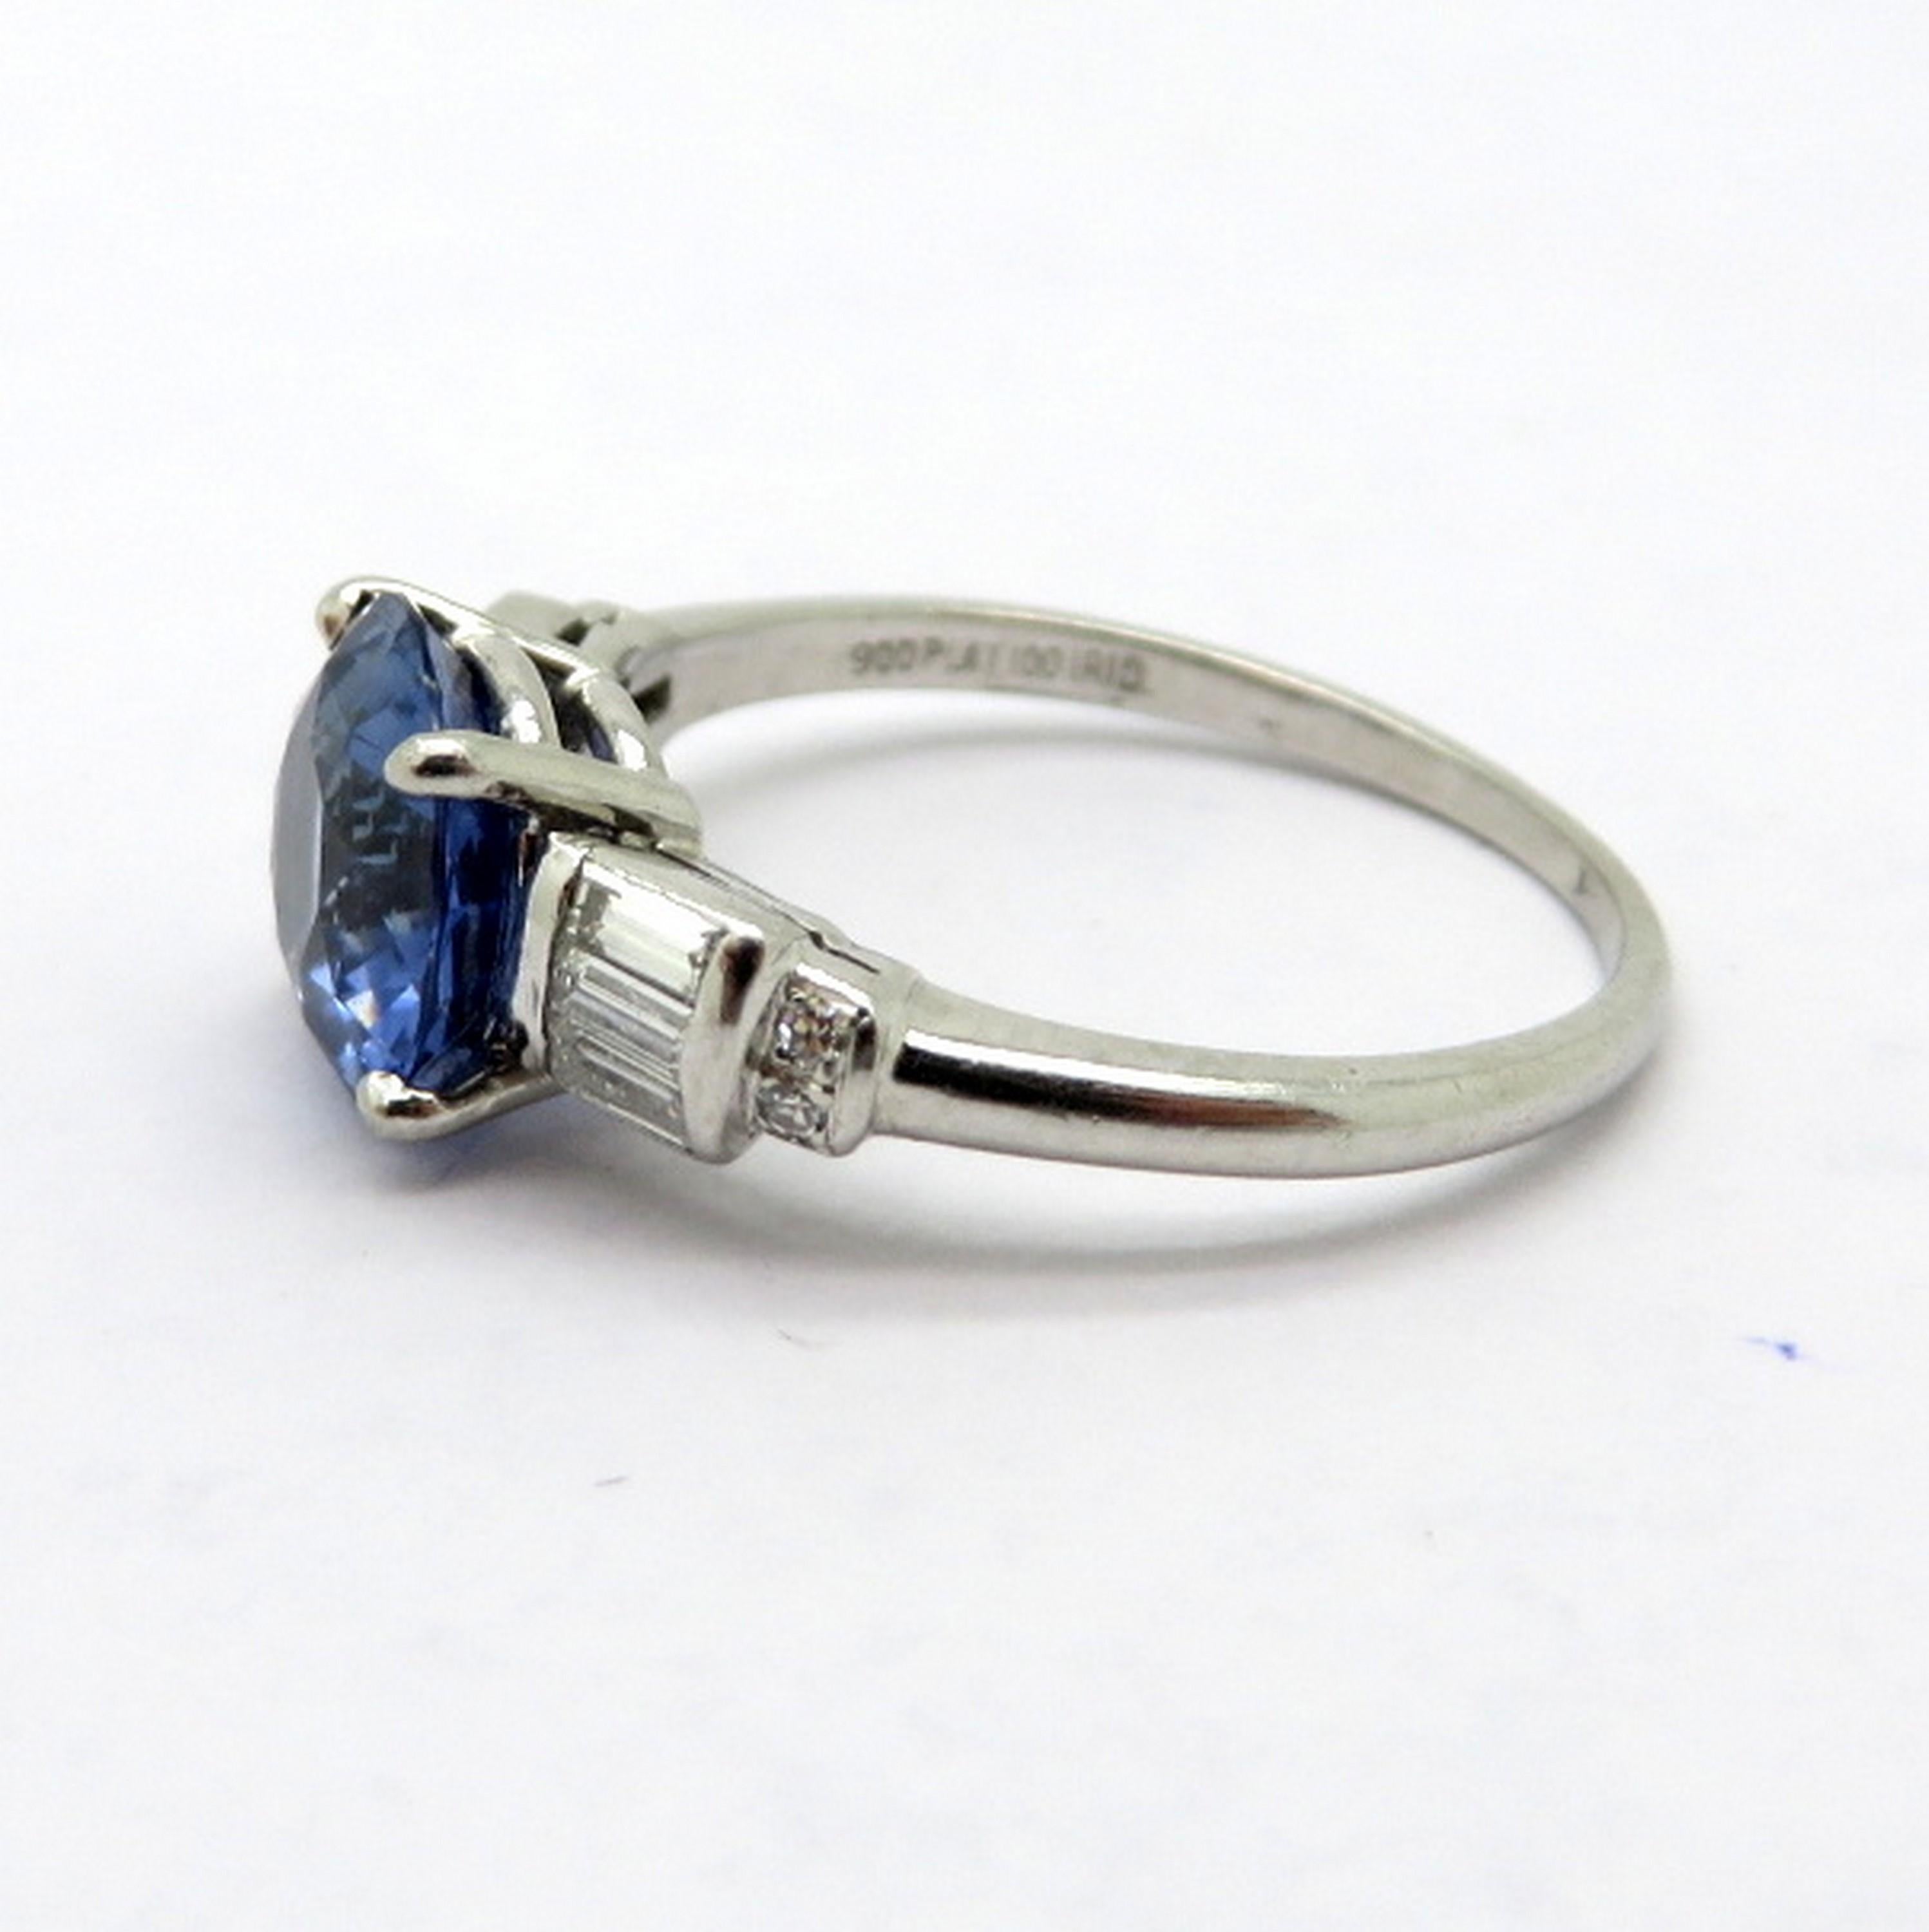 Antique platinum round sapphire and baguette diamond fashion statement ring. Showcasing one round brilliant cut fine quality sapphire, four prong basket set, weighing approximately 2.25 carats. Accented with six tapered baguette shaped diamonds and